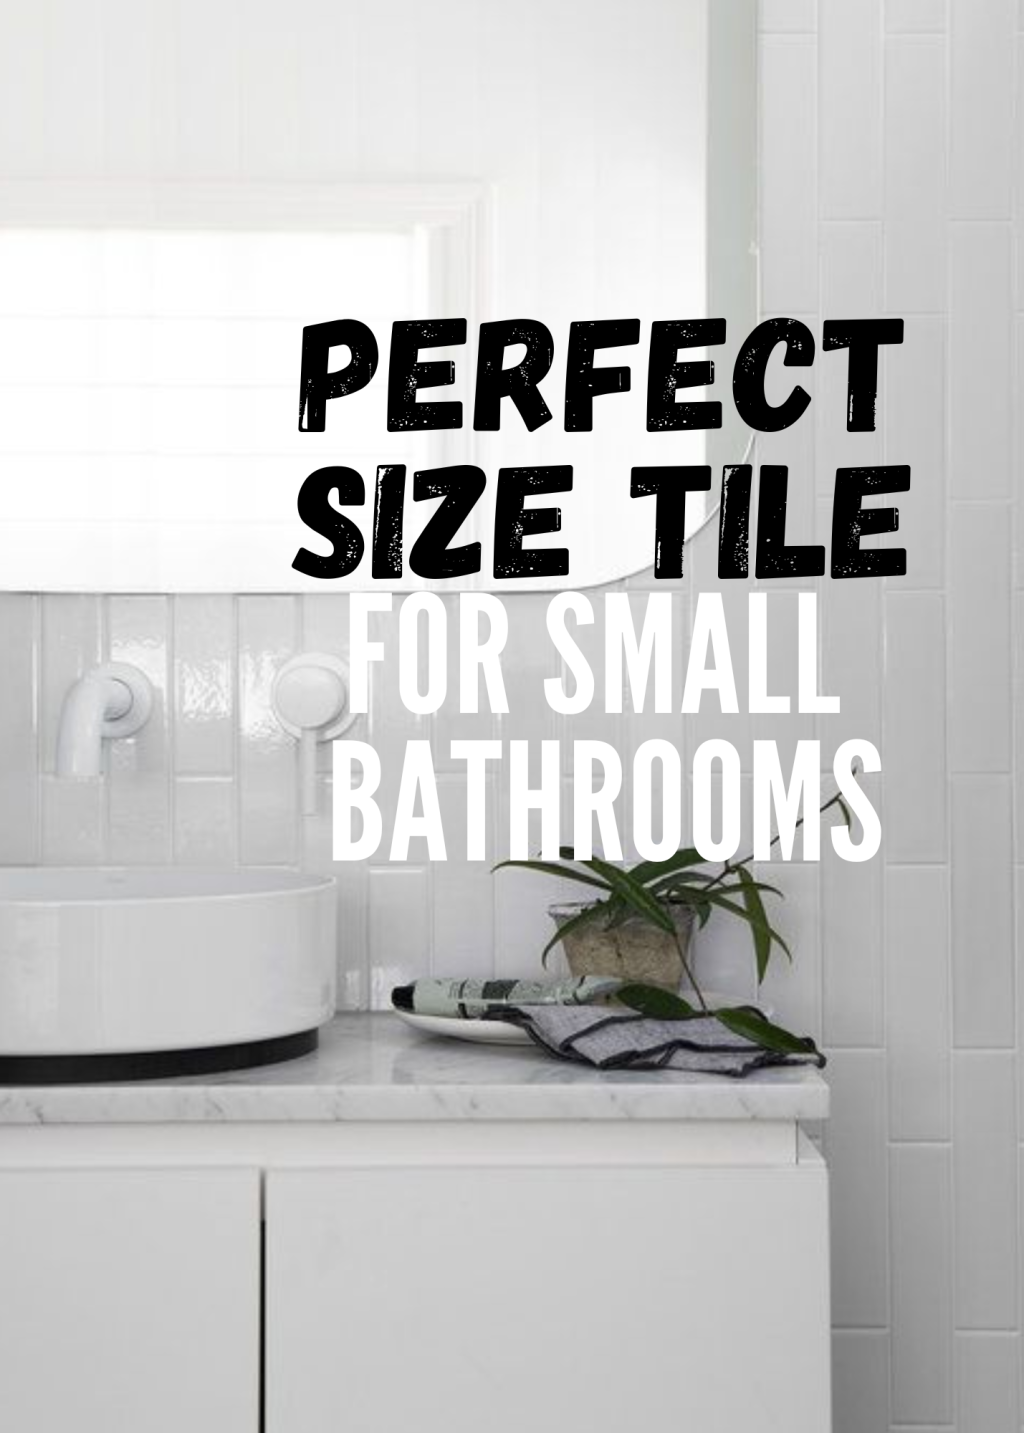 The Best Tile SIZE For Small Bathrooms